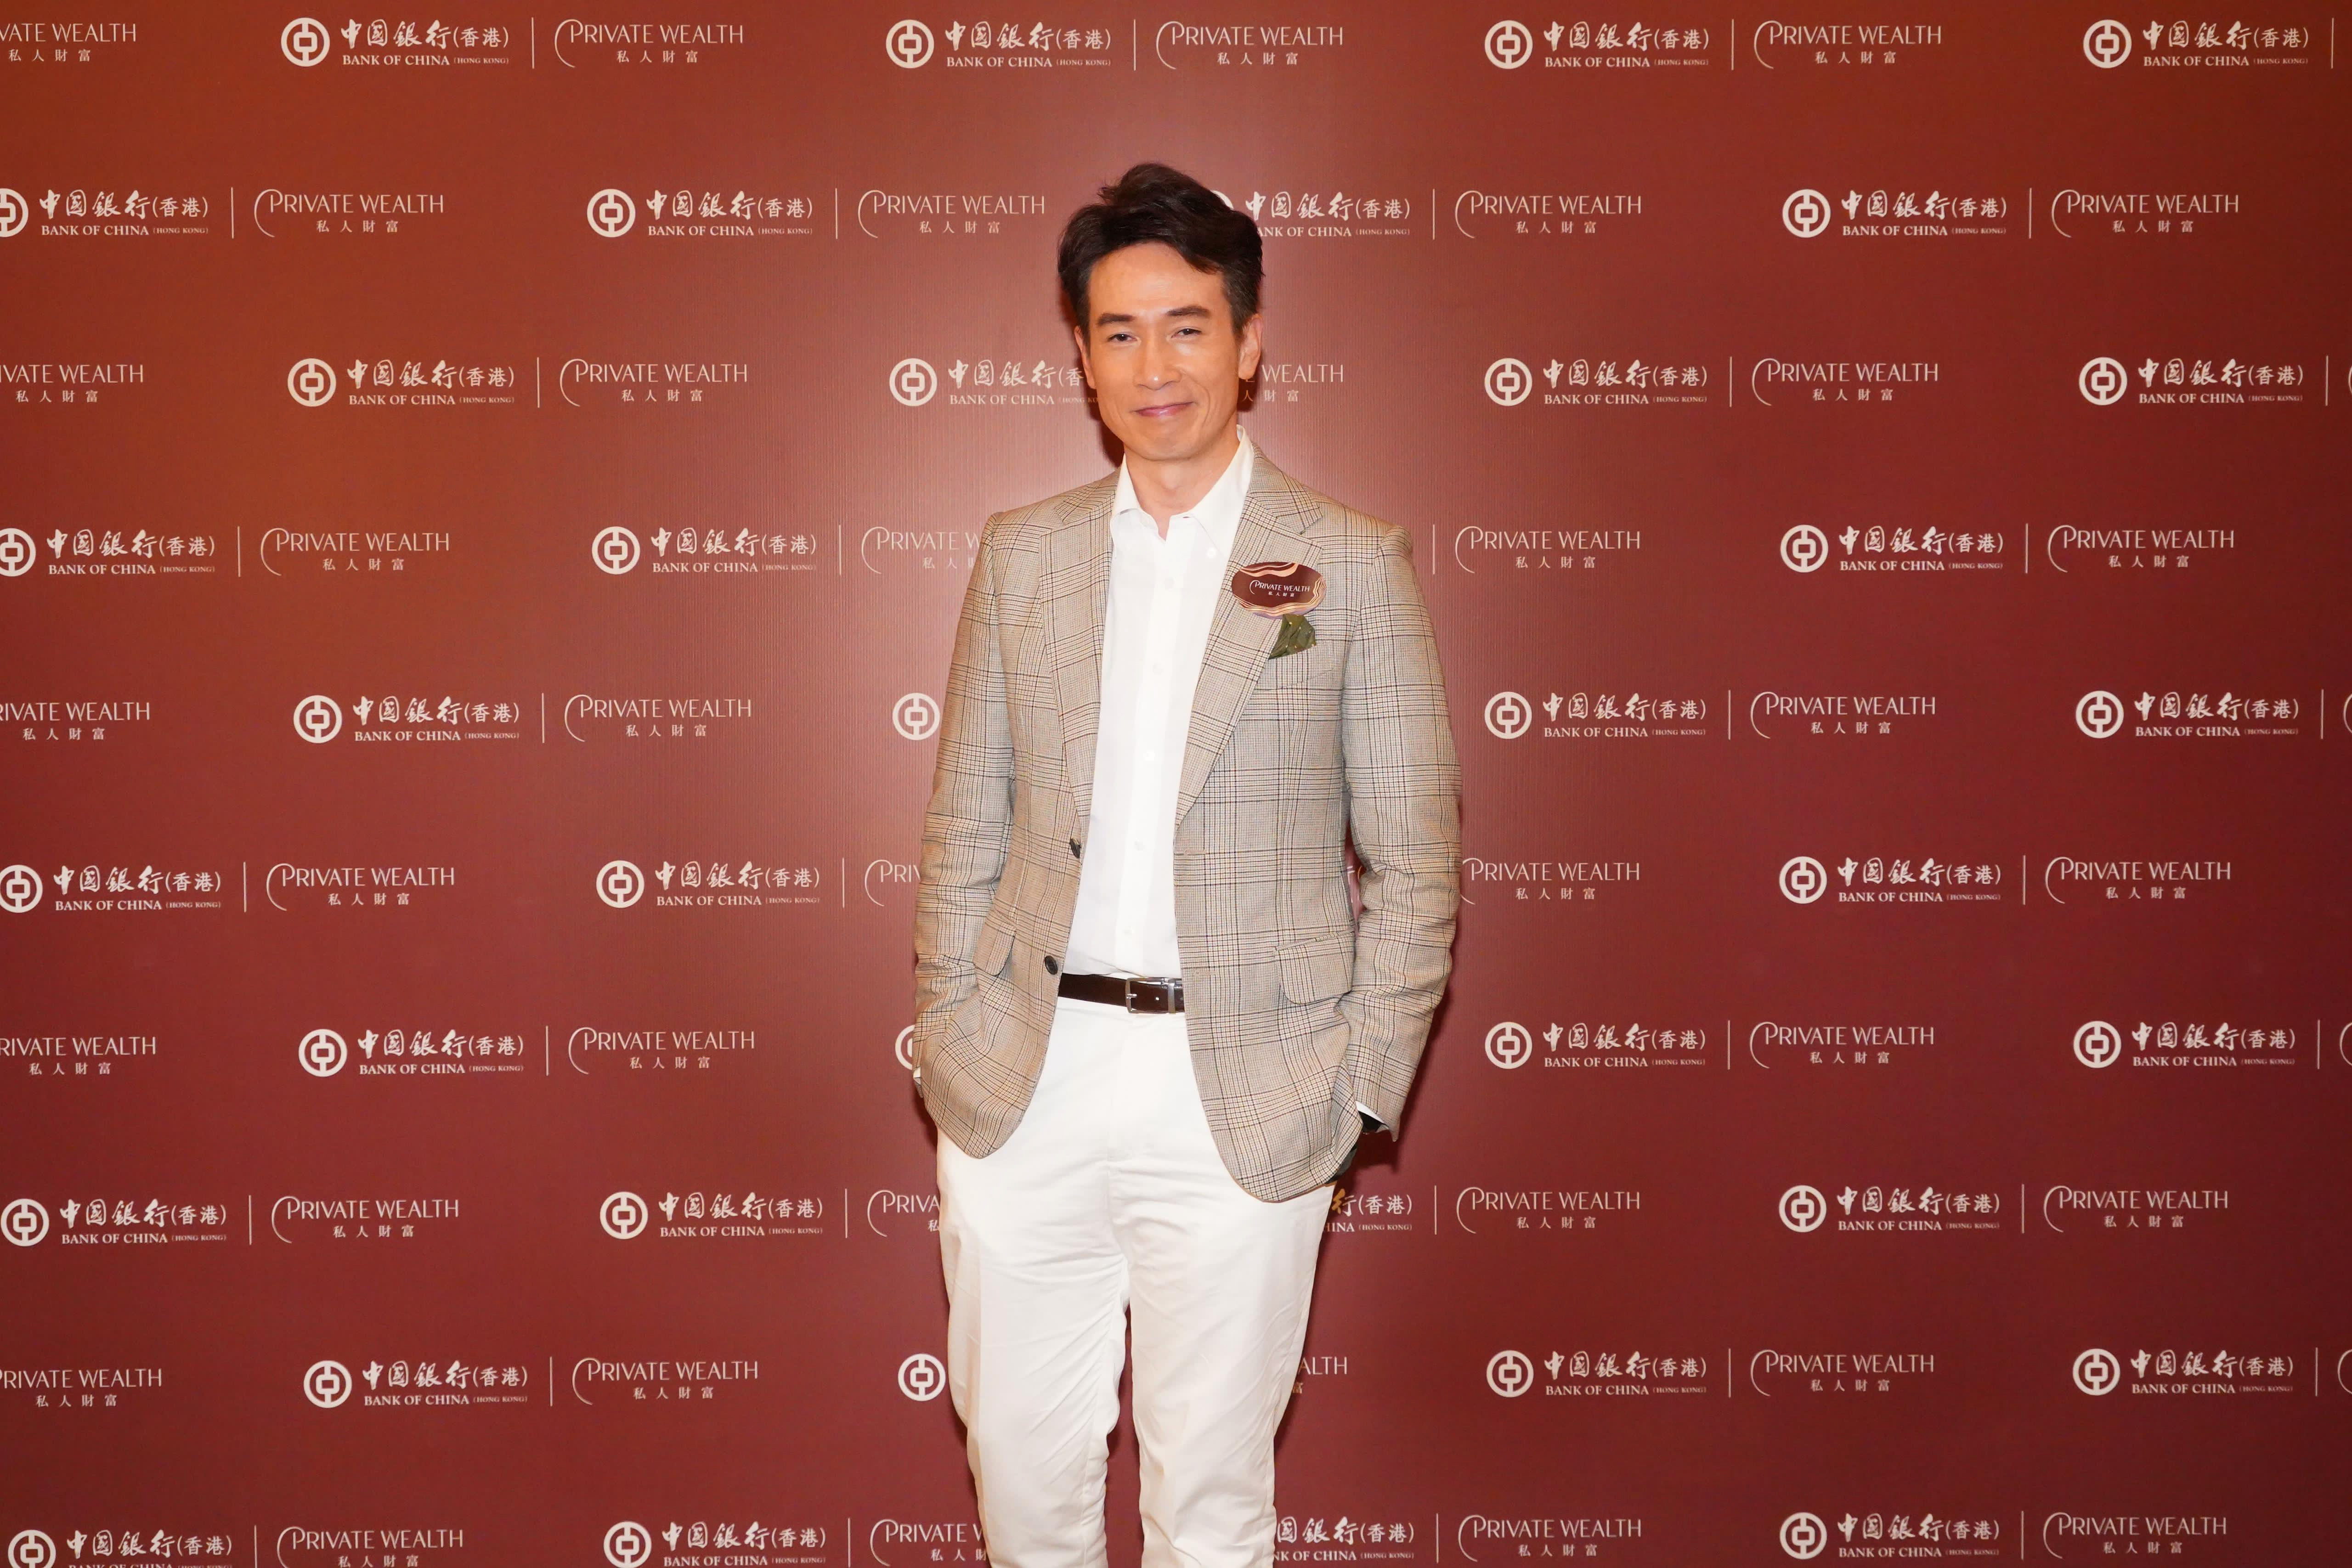 At the event, it was also announced that Moses Chan has officially become the brand ambassador of BOCHK Private Wealth.